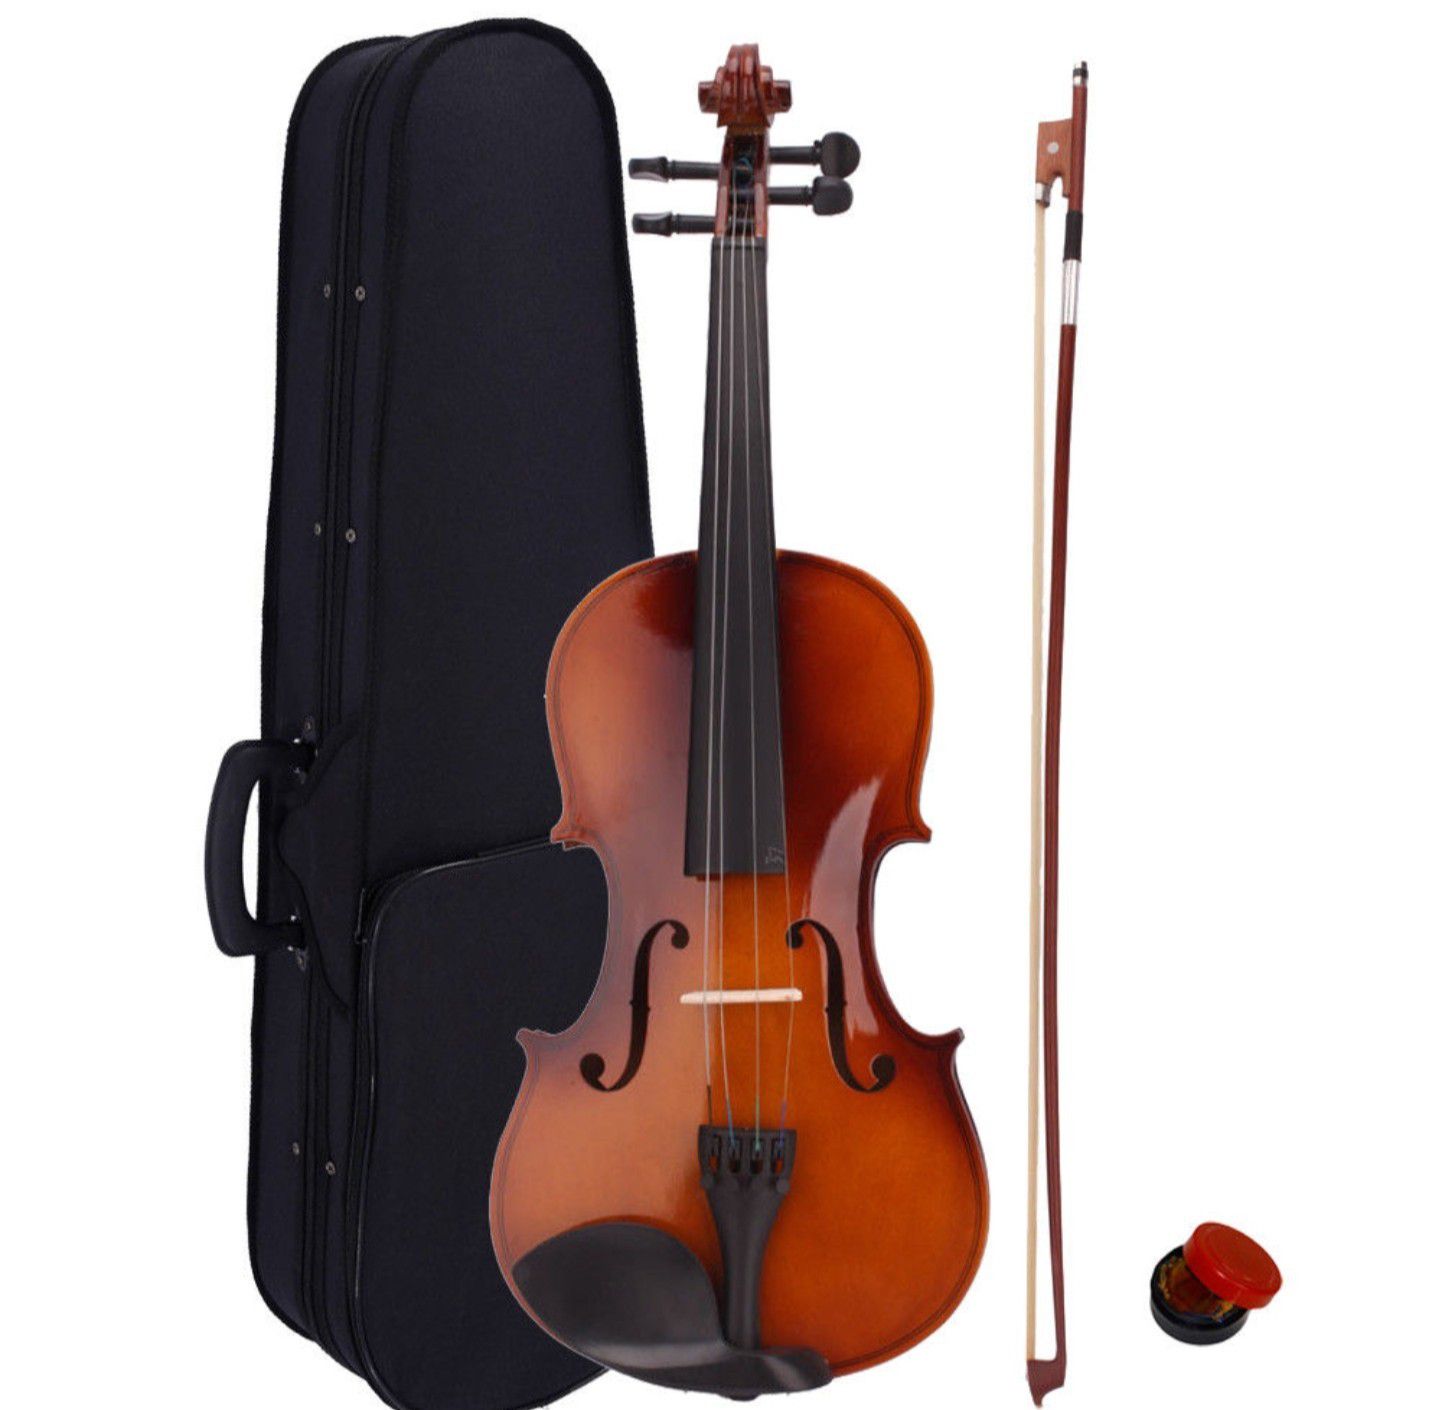 Brand New 4/4 Natural Acoustic Violin Set with Case+ Bow + Rosin